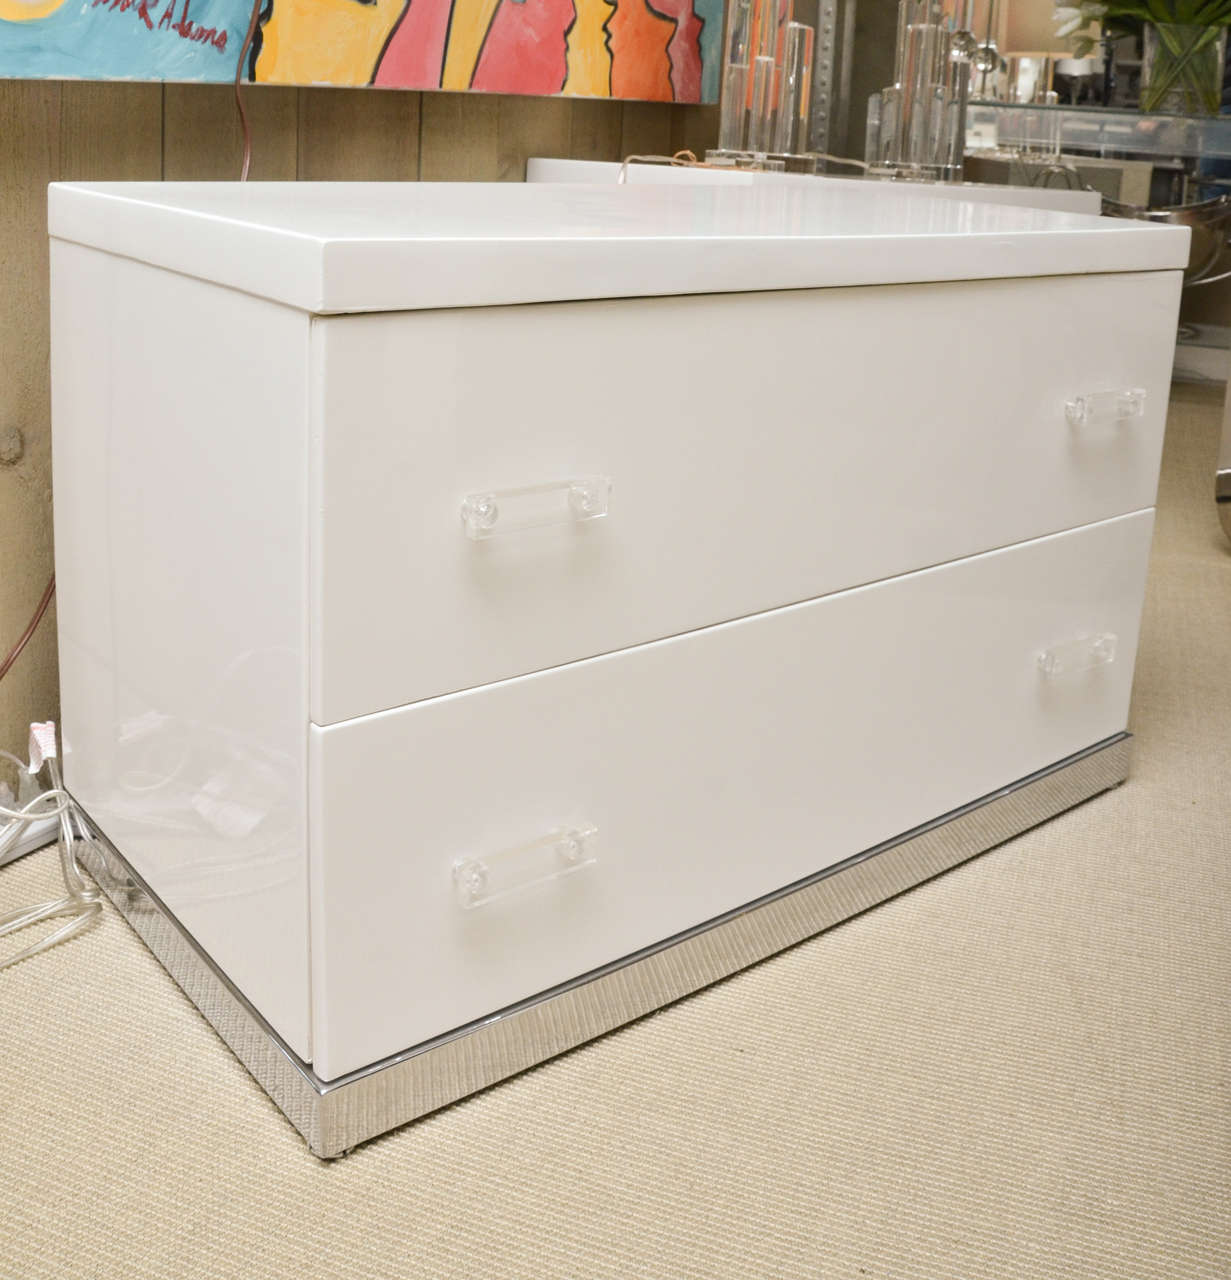 Attractive pair of white lacquer 2-drawer nite stands. The nite stands have chrome bases and Lucite draw pulls